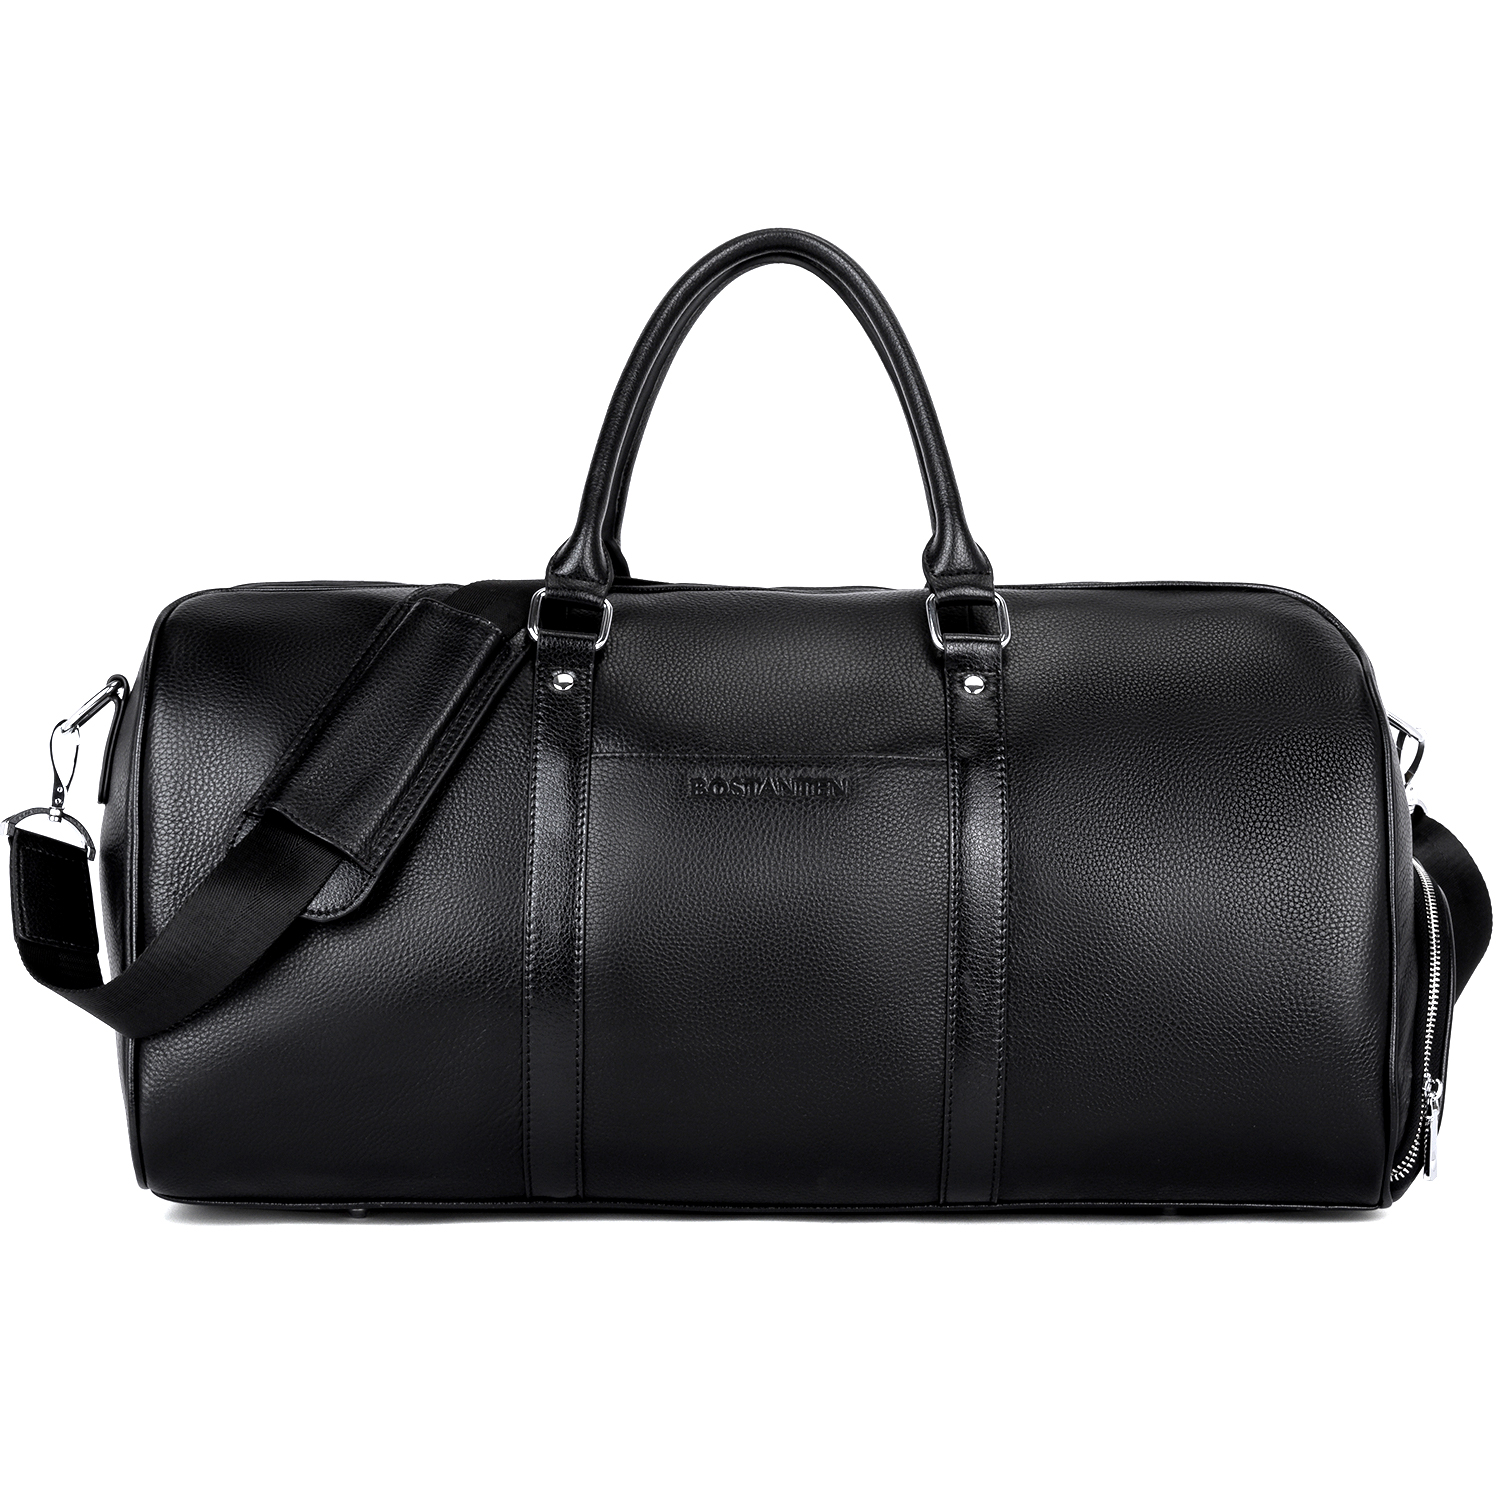 Mens Bags Gym bags and sports bags Moschino Leather Duffel Bags in Black for Men 